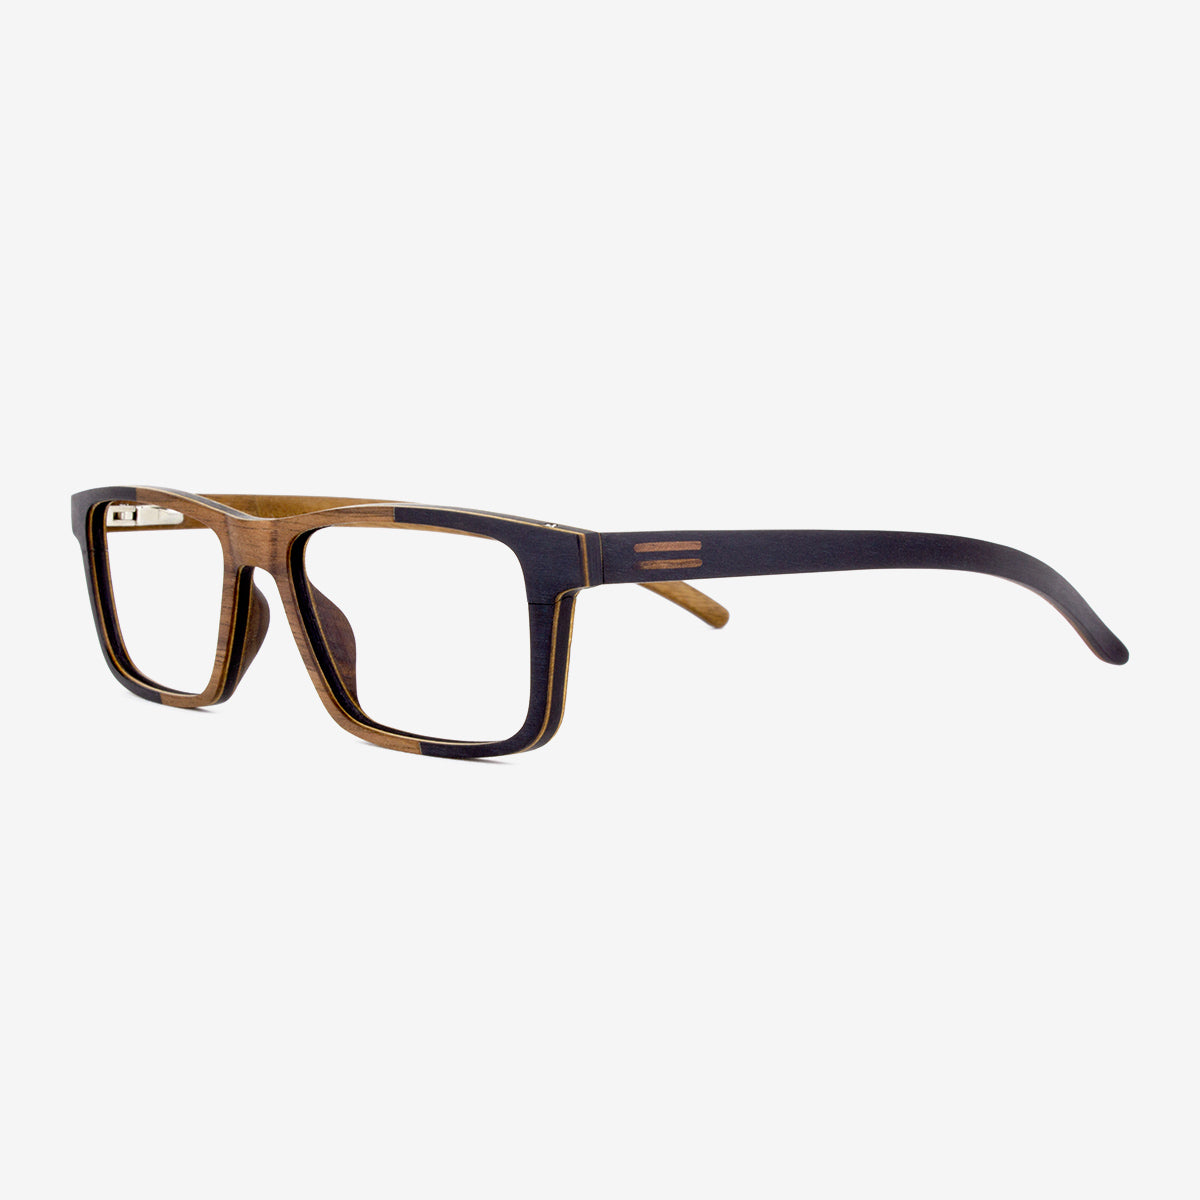 Handcrafted black maple and walnut wooden eyeglass frames